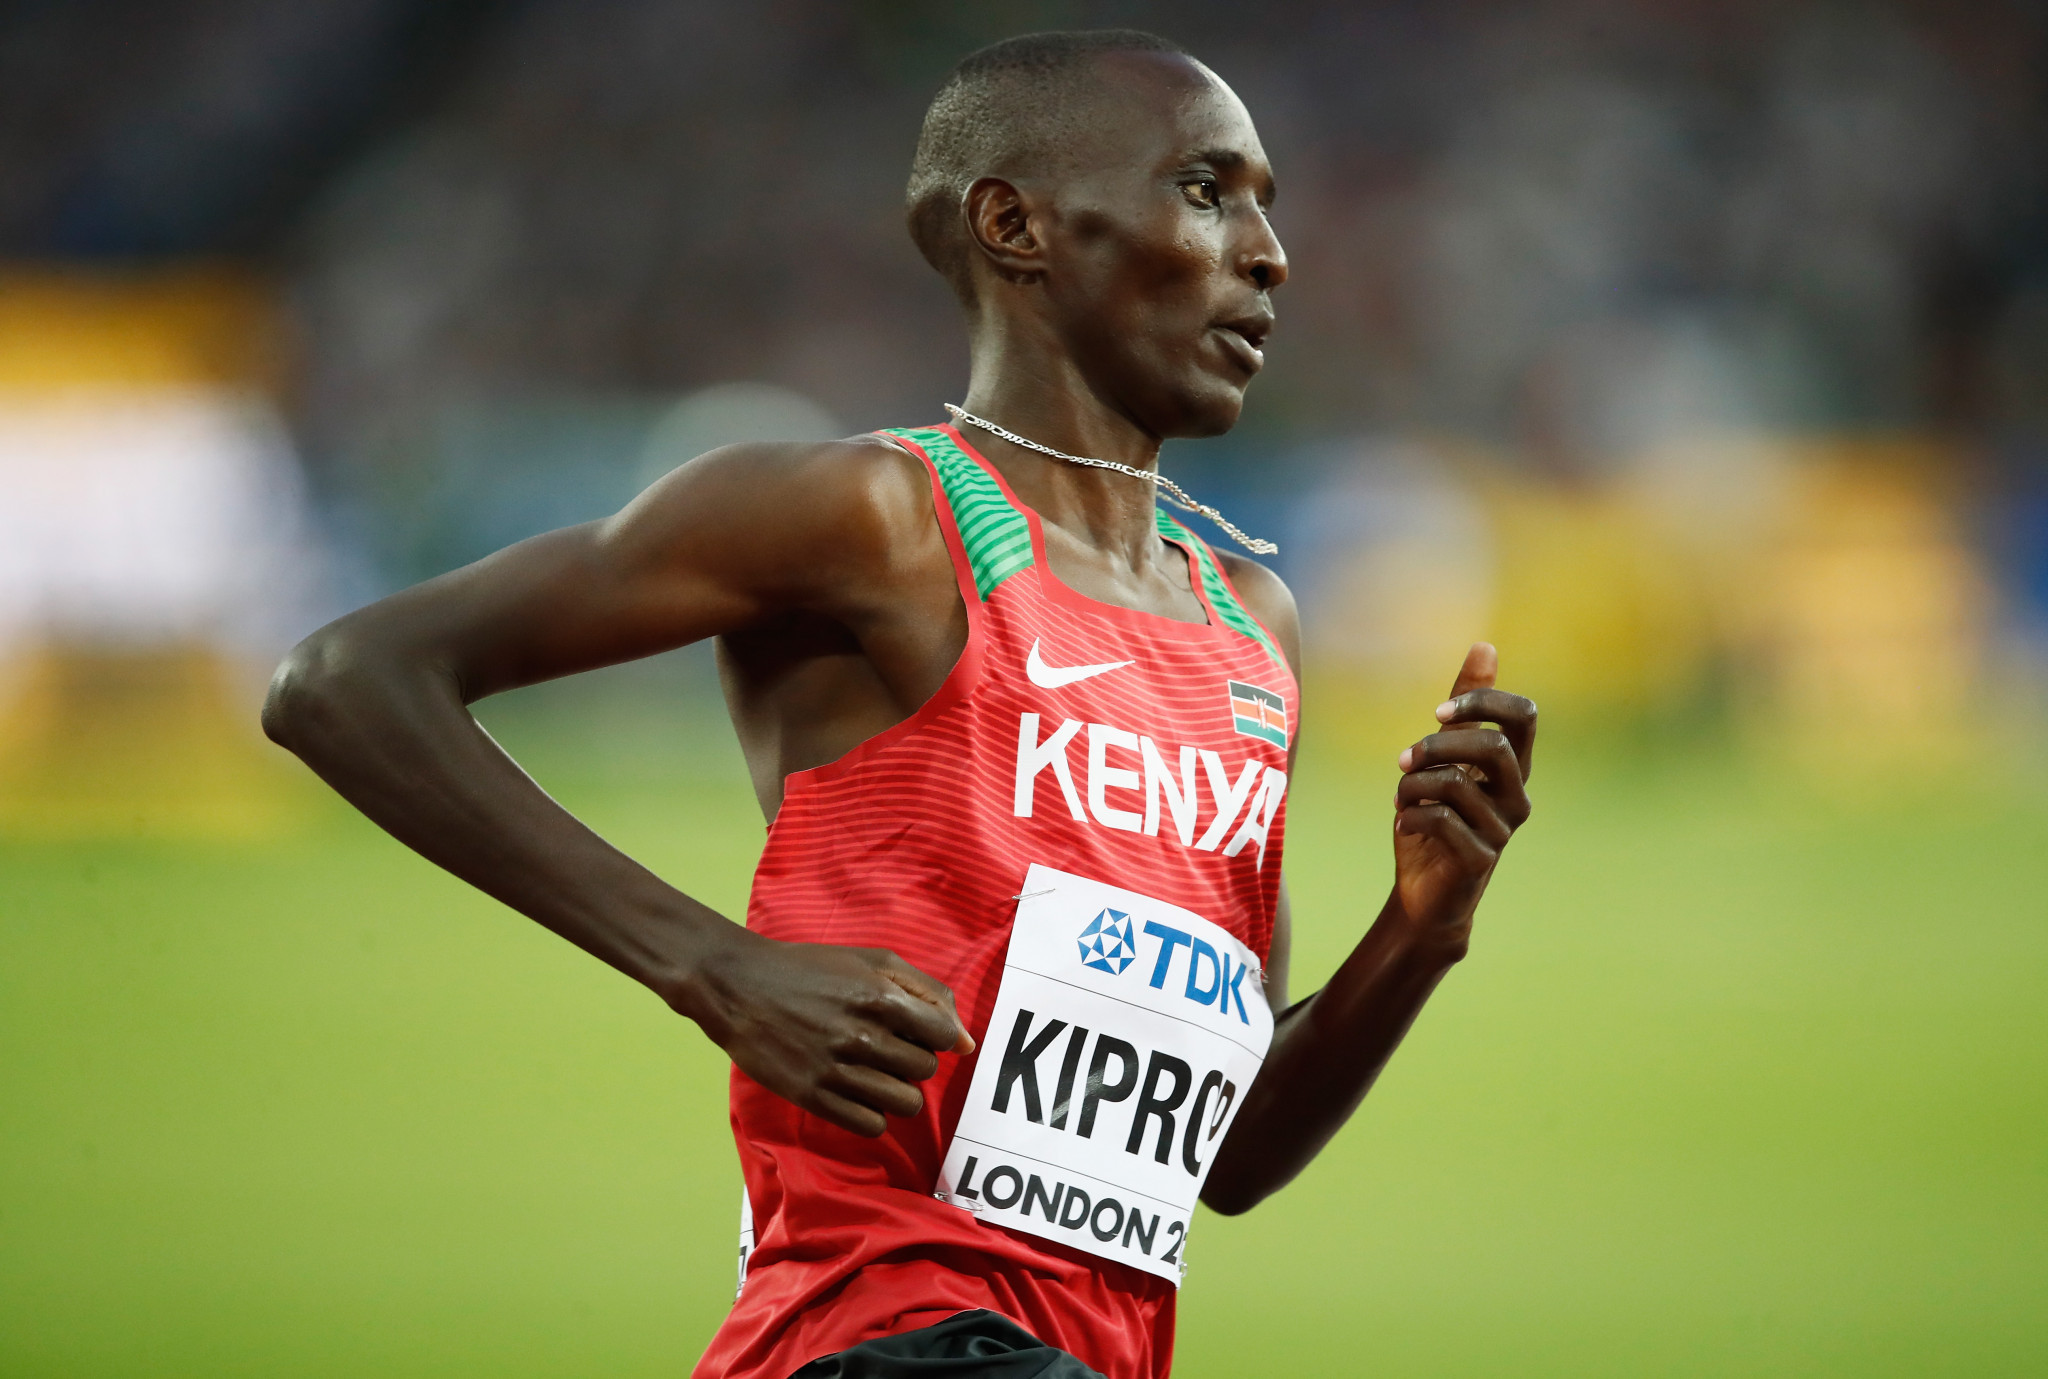 Kenyan Olympic 1500m champion Kiprop tests positive for EPO, reports claim